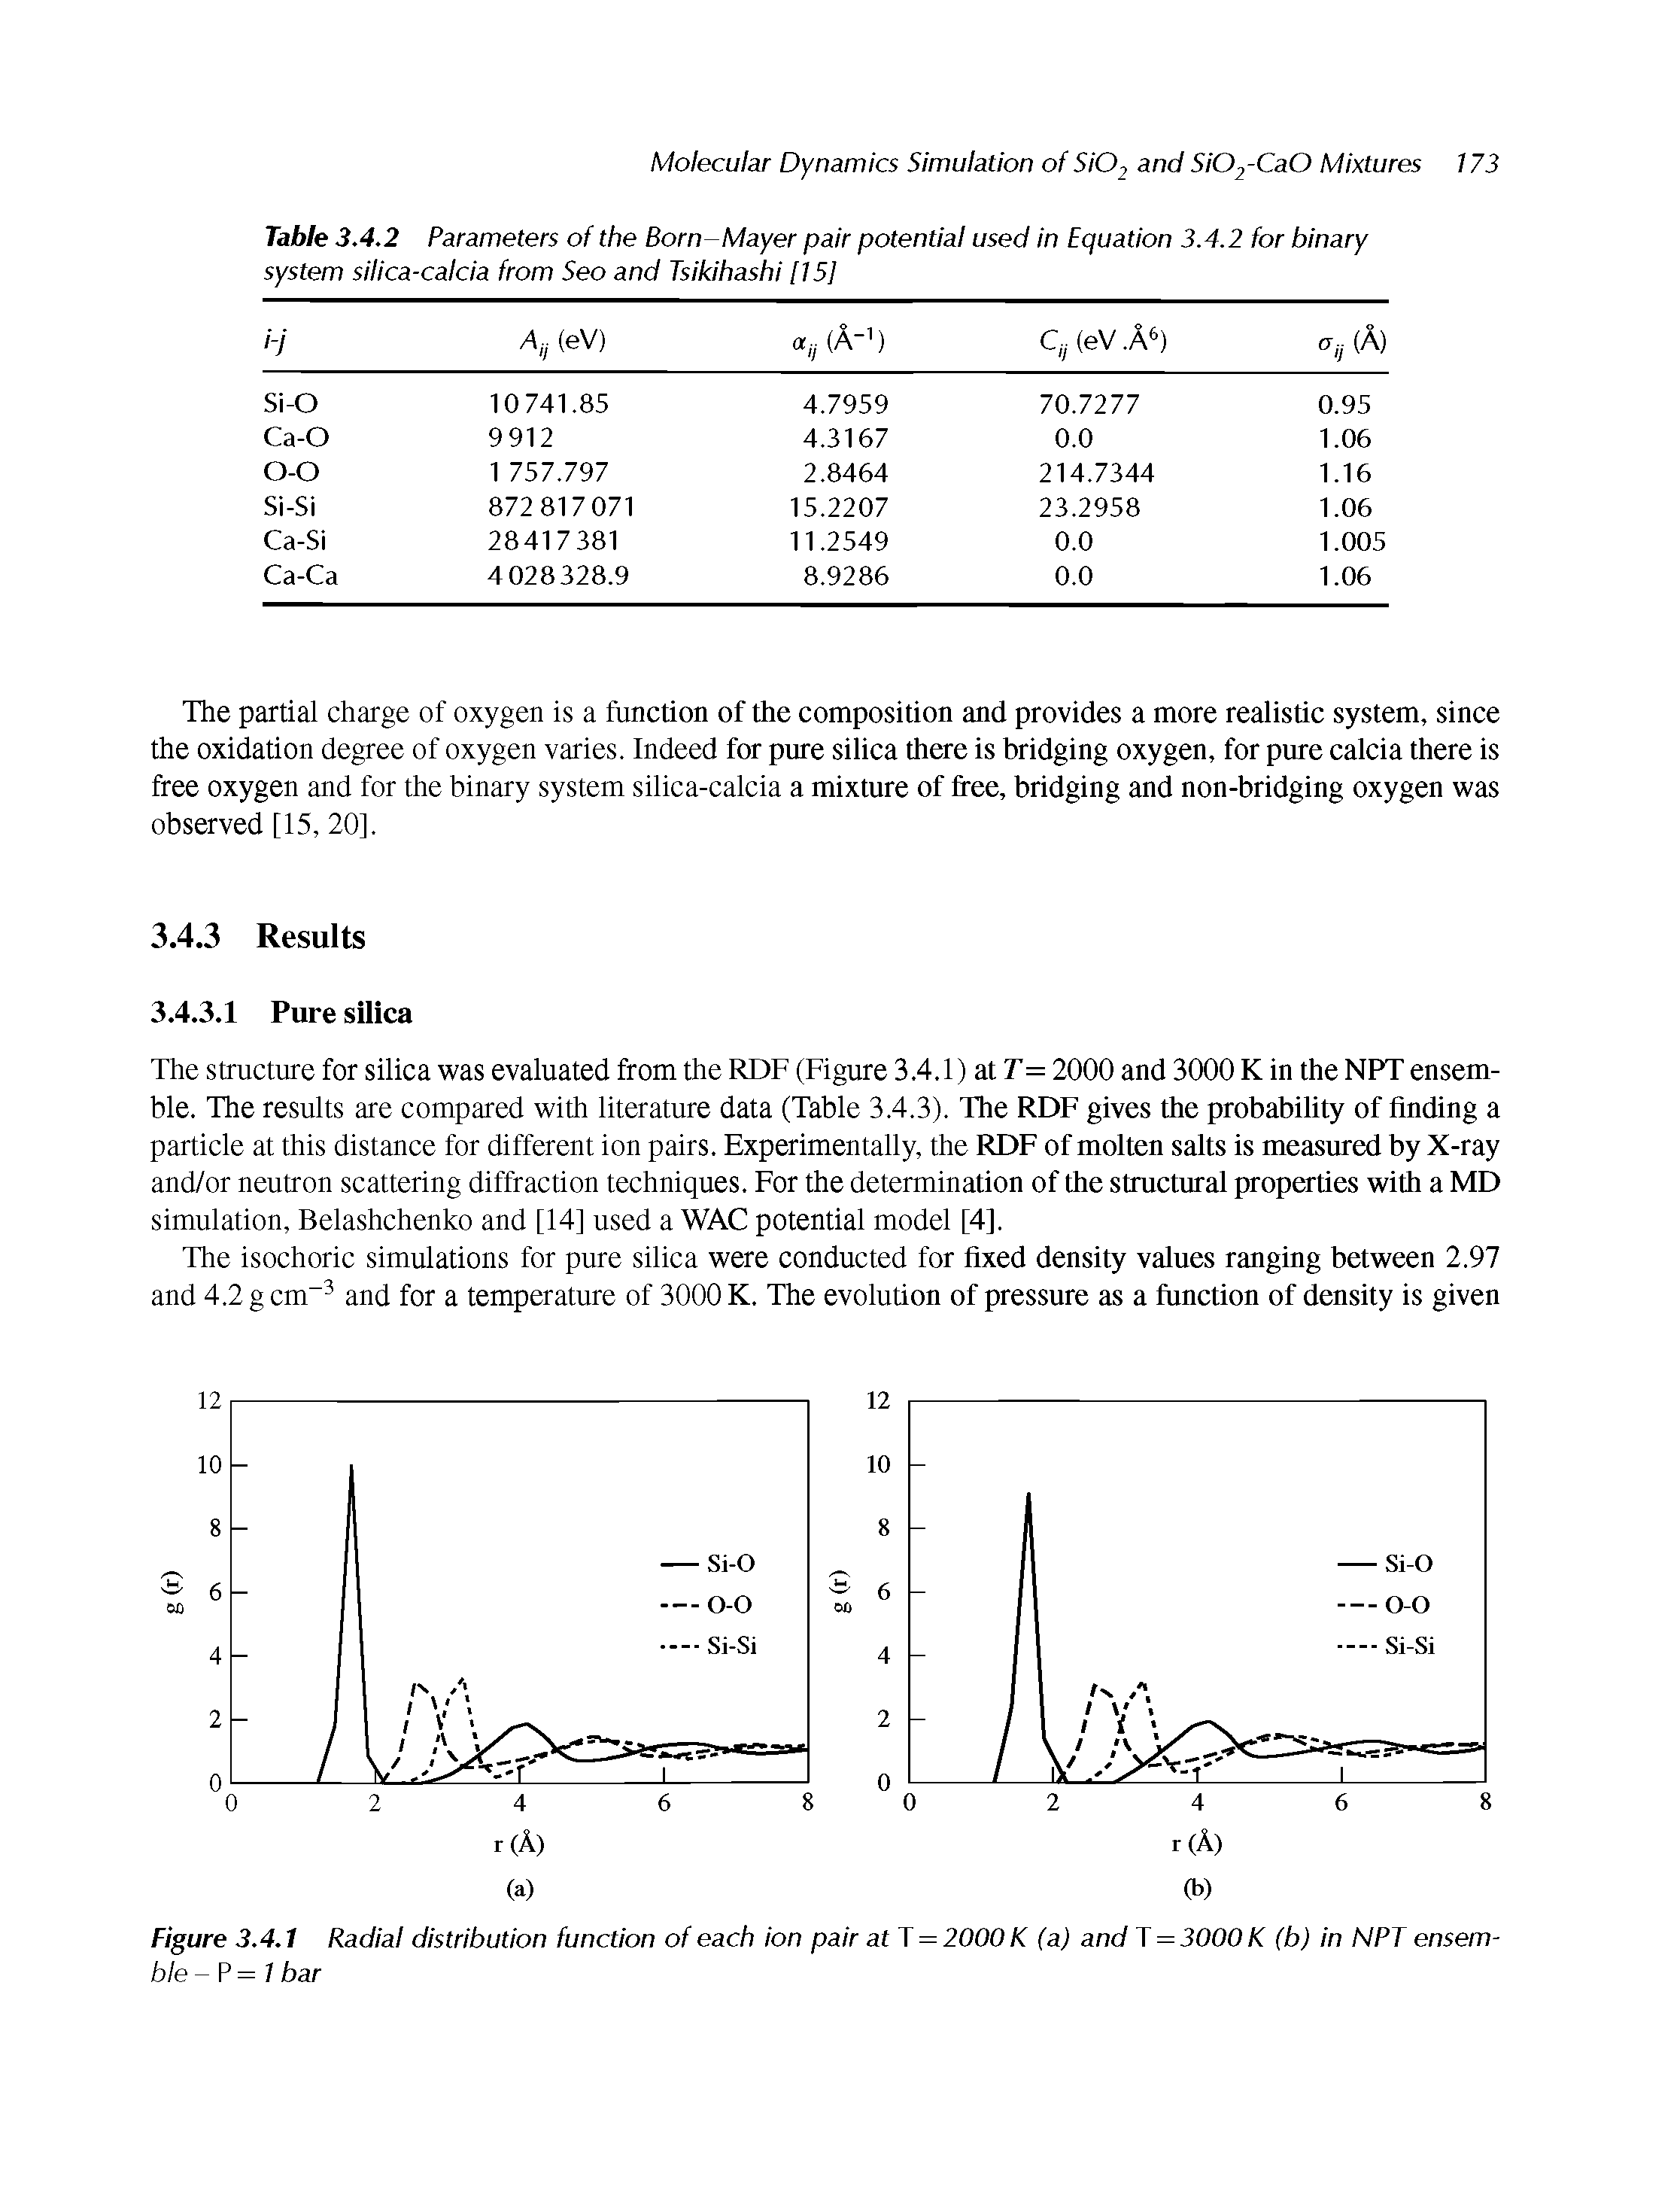 Table 3.4.2 Parameters of the Born-Mayer pair potential used in Equation 3.4.2 for binary system silica-calcia from Seo and Tsikihashi [15]...